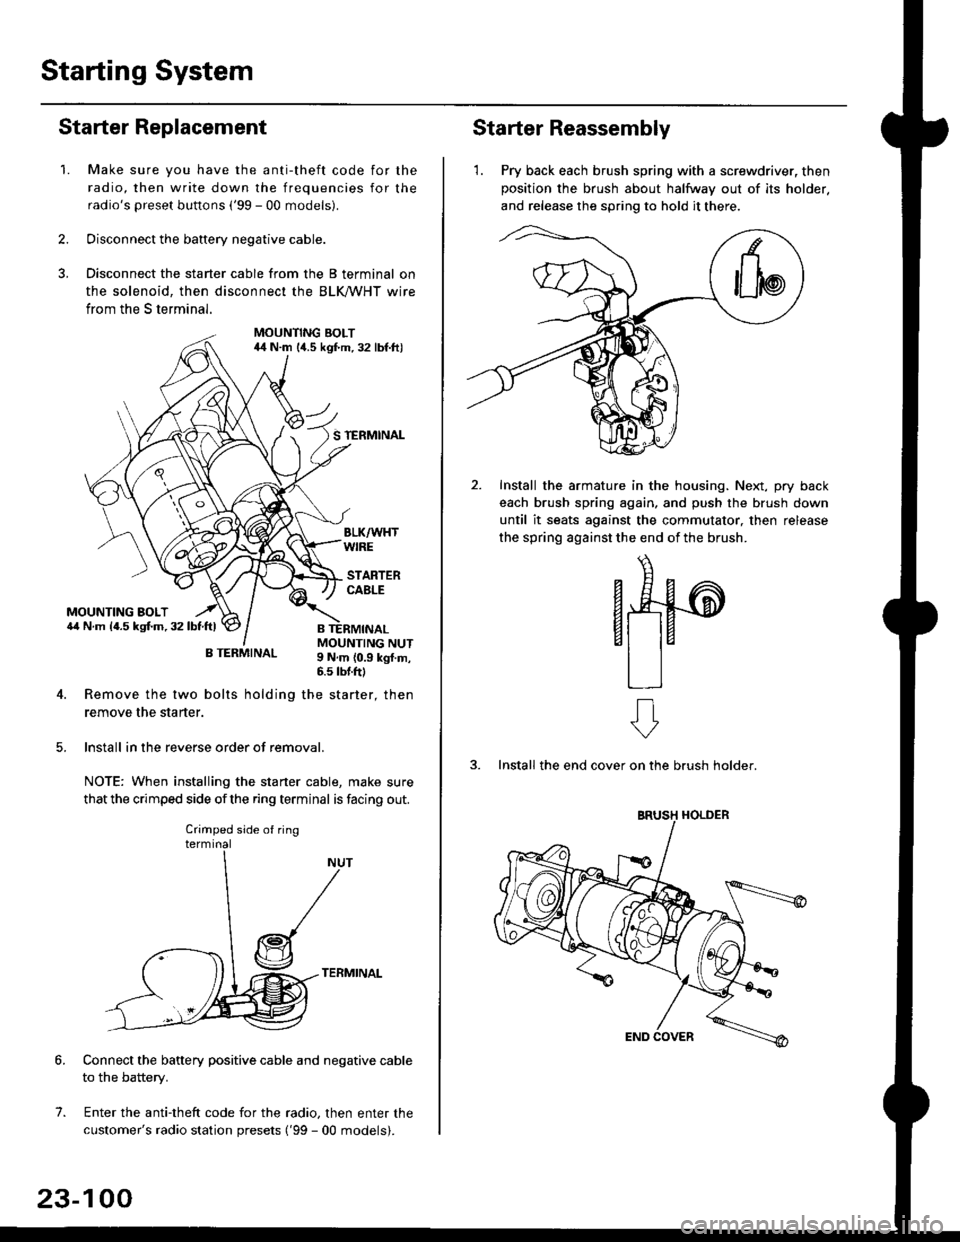 HONDA CIVIC 1996 6.G Workshop Manual Starting System
Starter Replacement
1.Make sure you have the anti-theft code for the
radio, then write down the frequencies for the
radios preset buttons (99 - 00 models).
Disconnect the battery neg